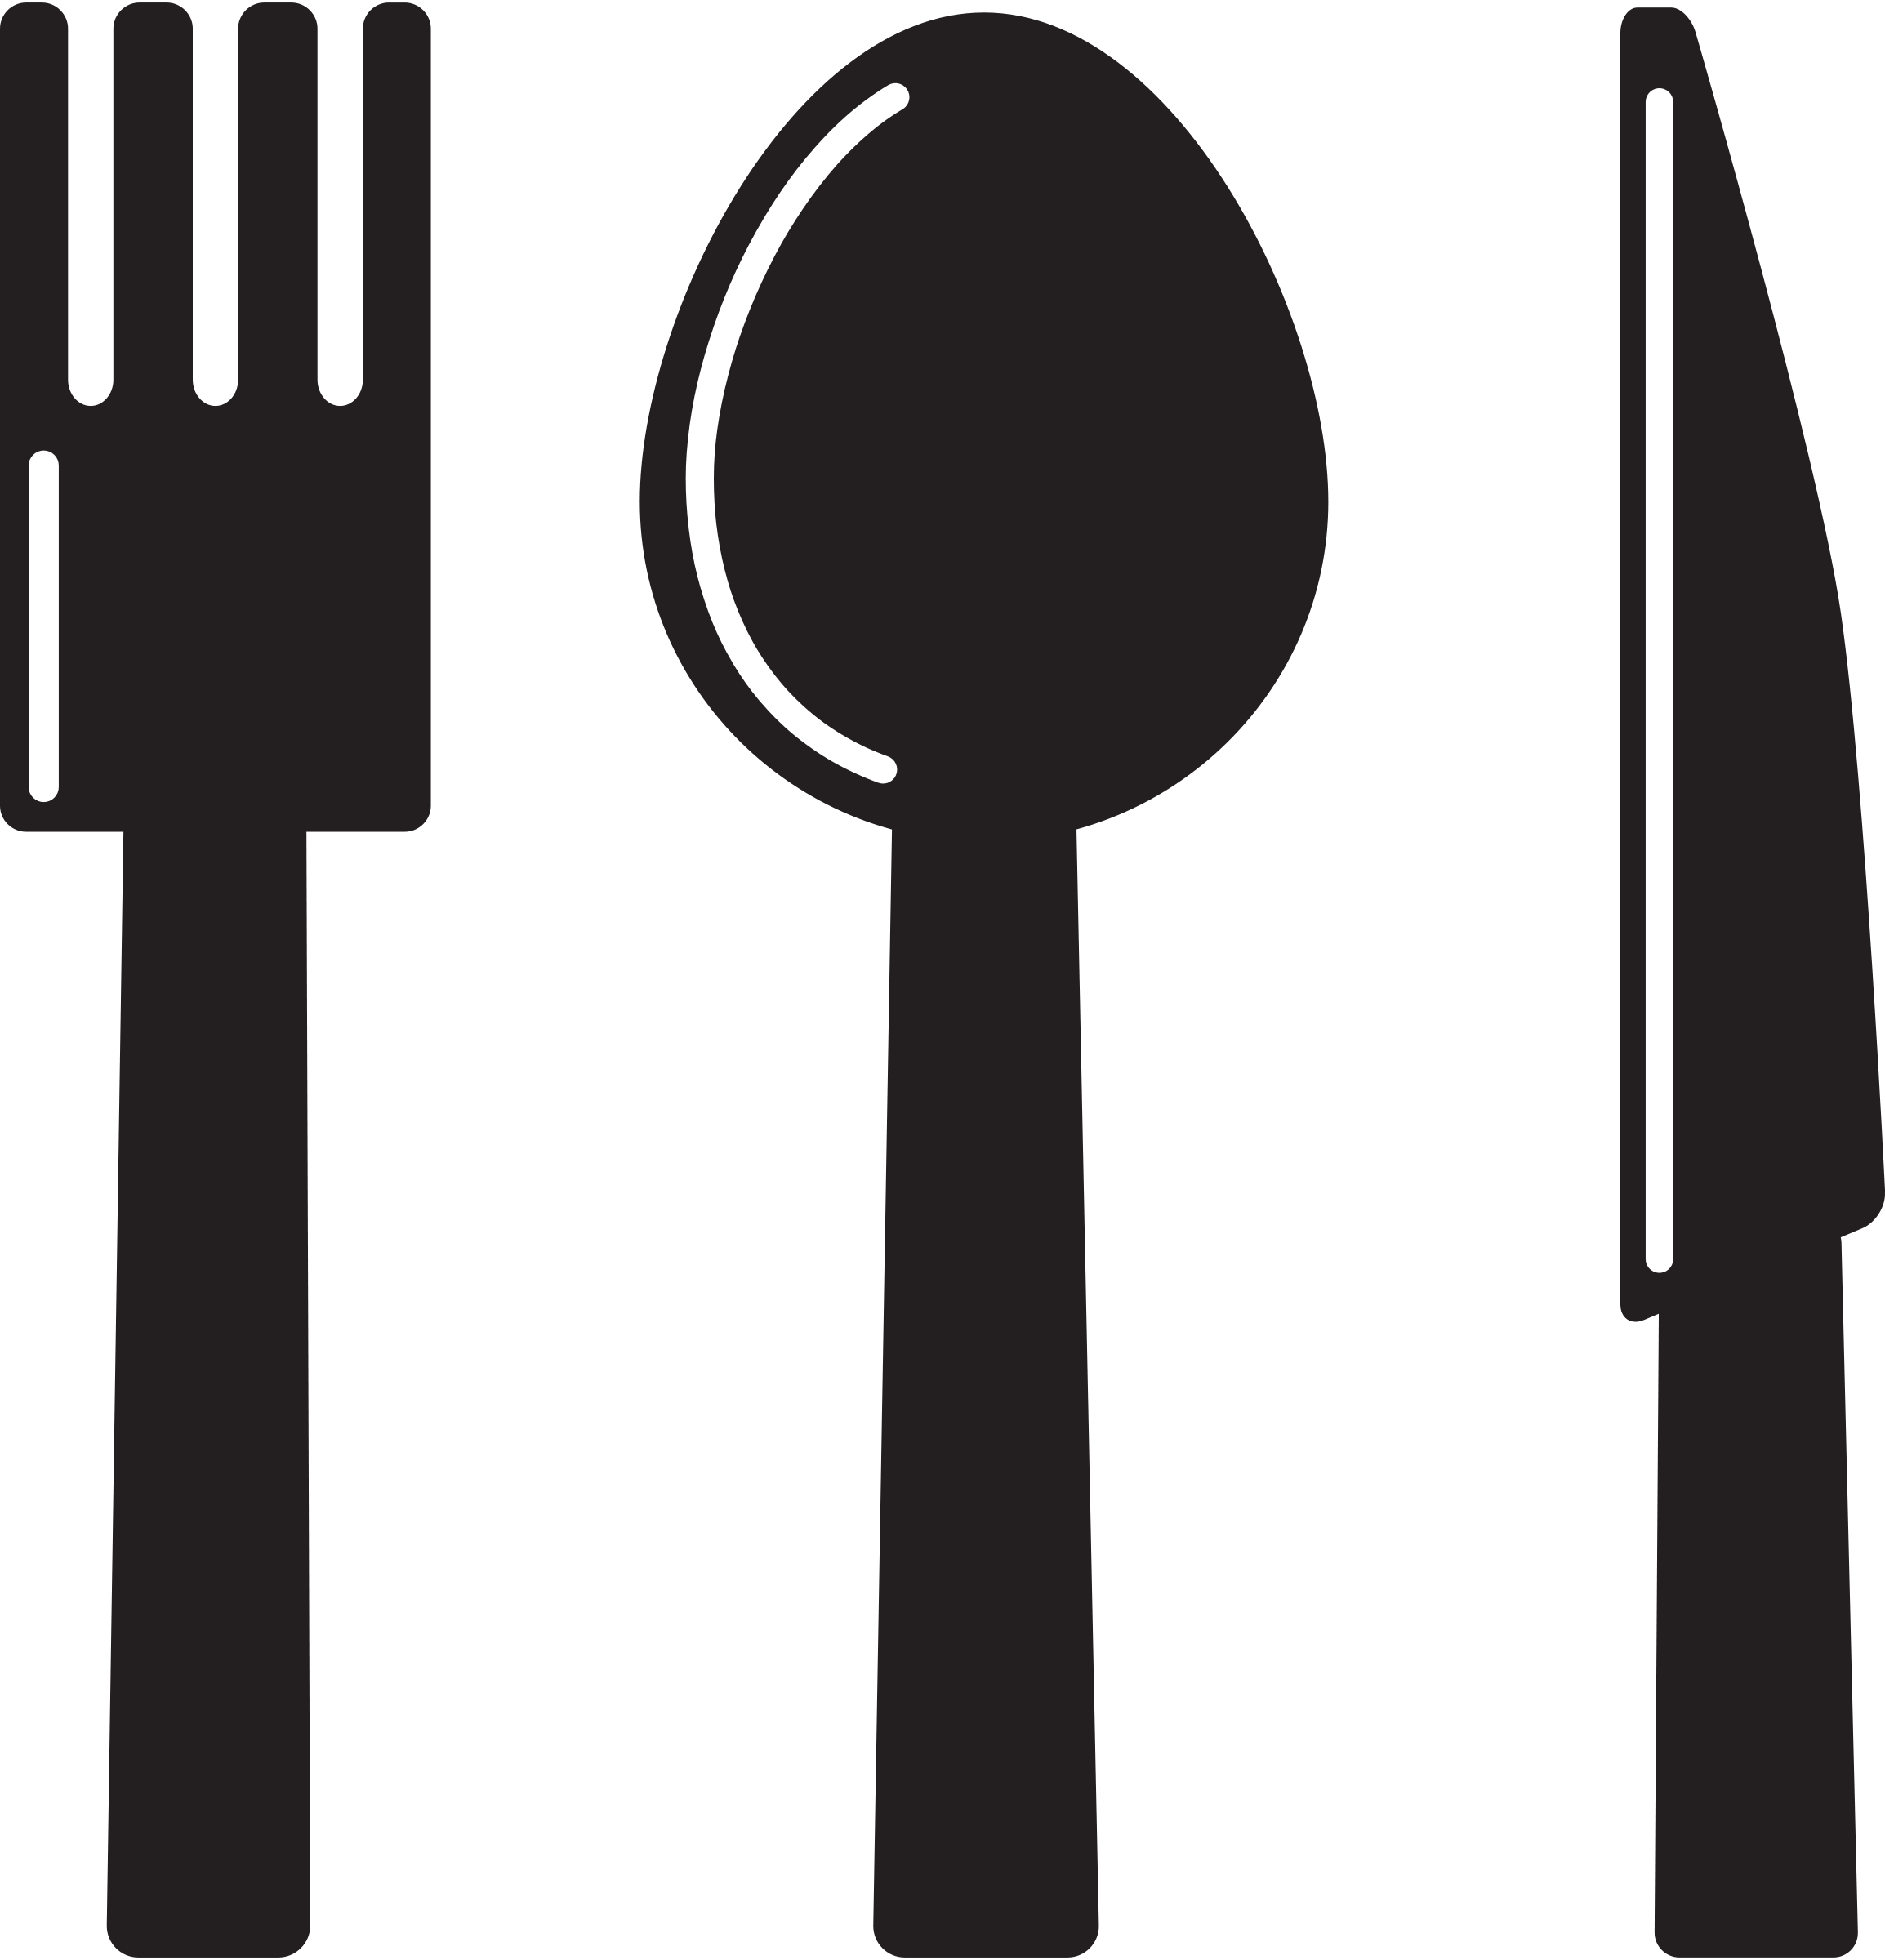 Spoon and fork clipart